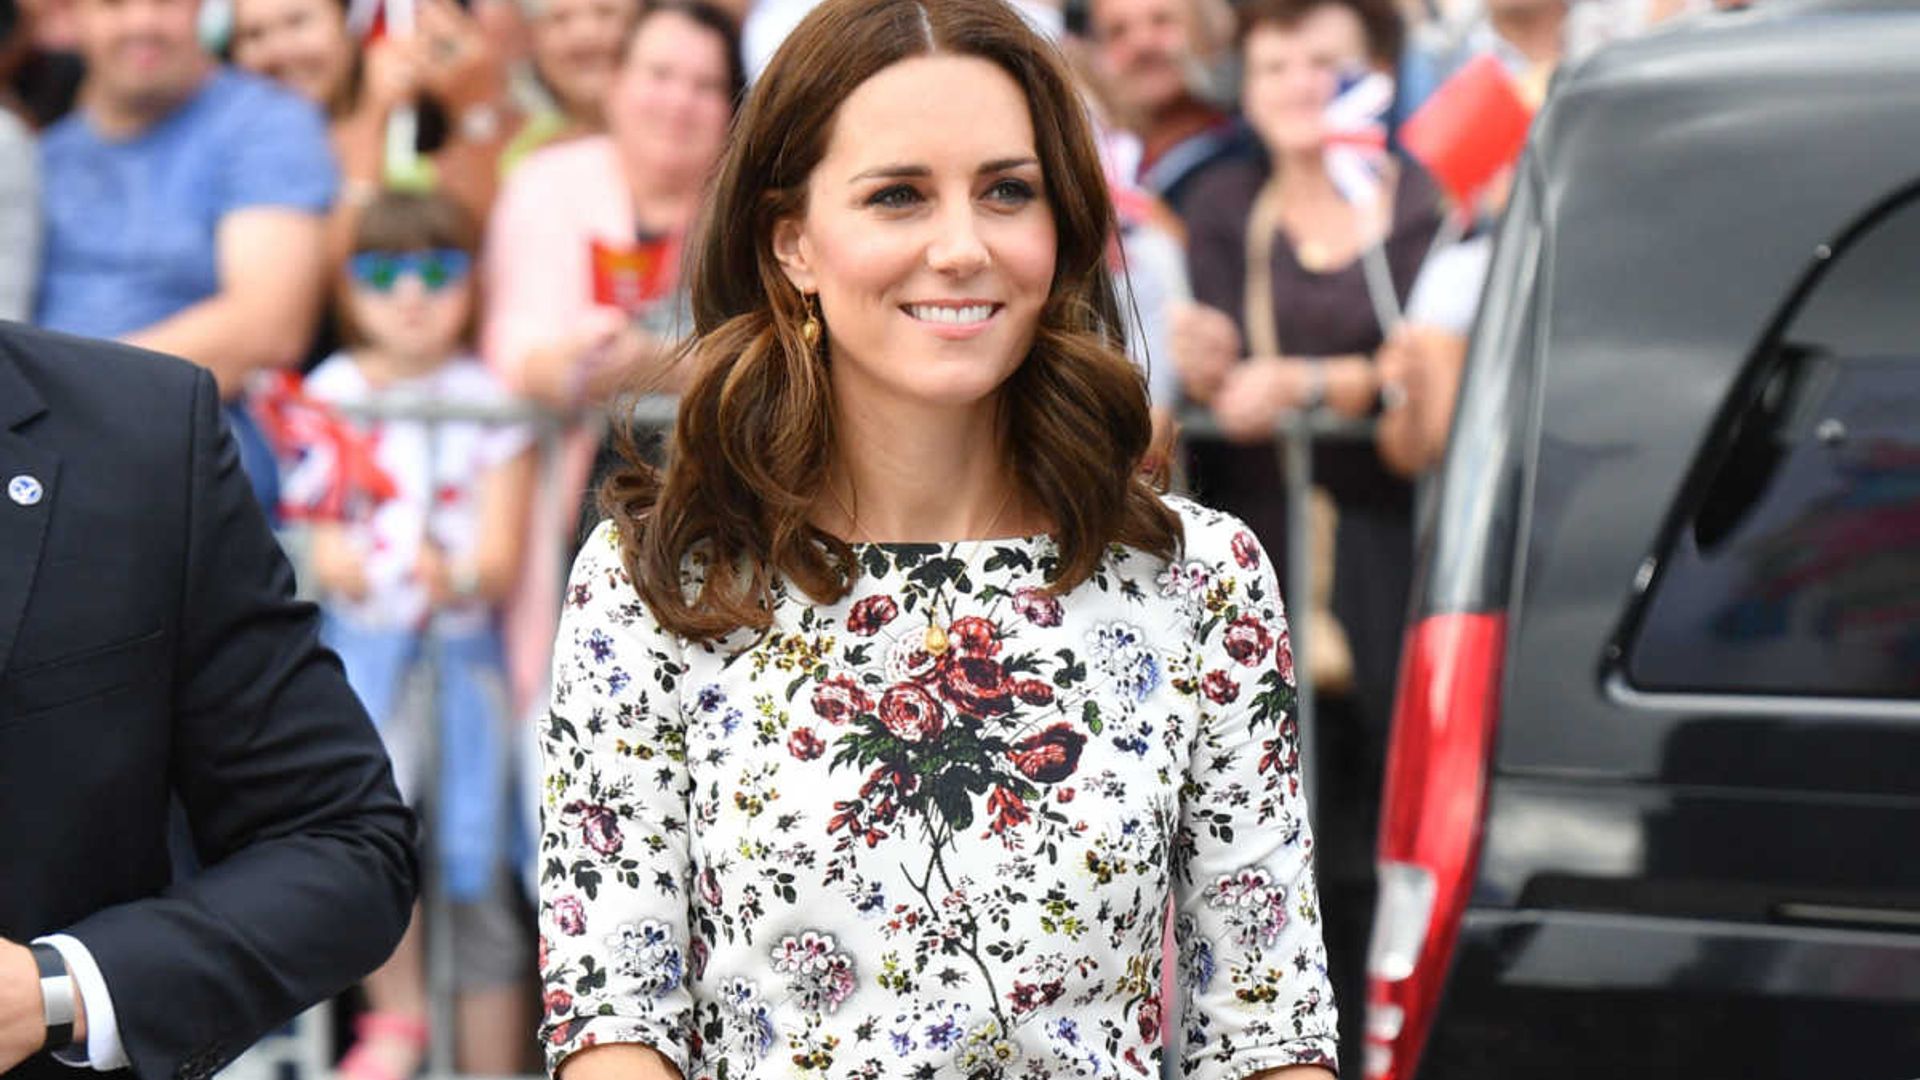 Nordstrom Sale 2022: 16 Kate Middleton-style floral dresses for up to 60%  off NOW | HELLO!